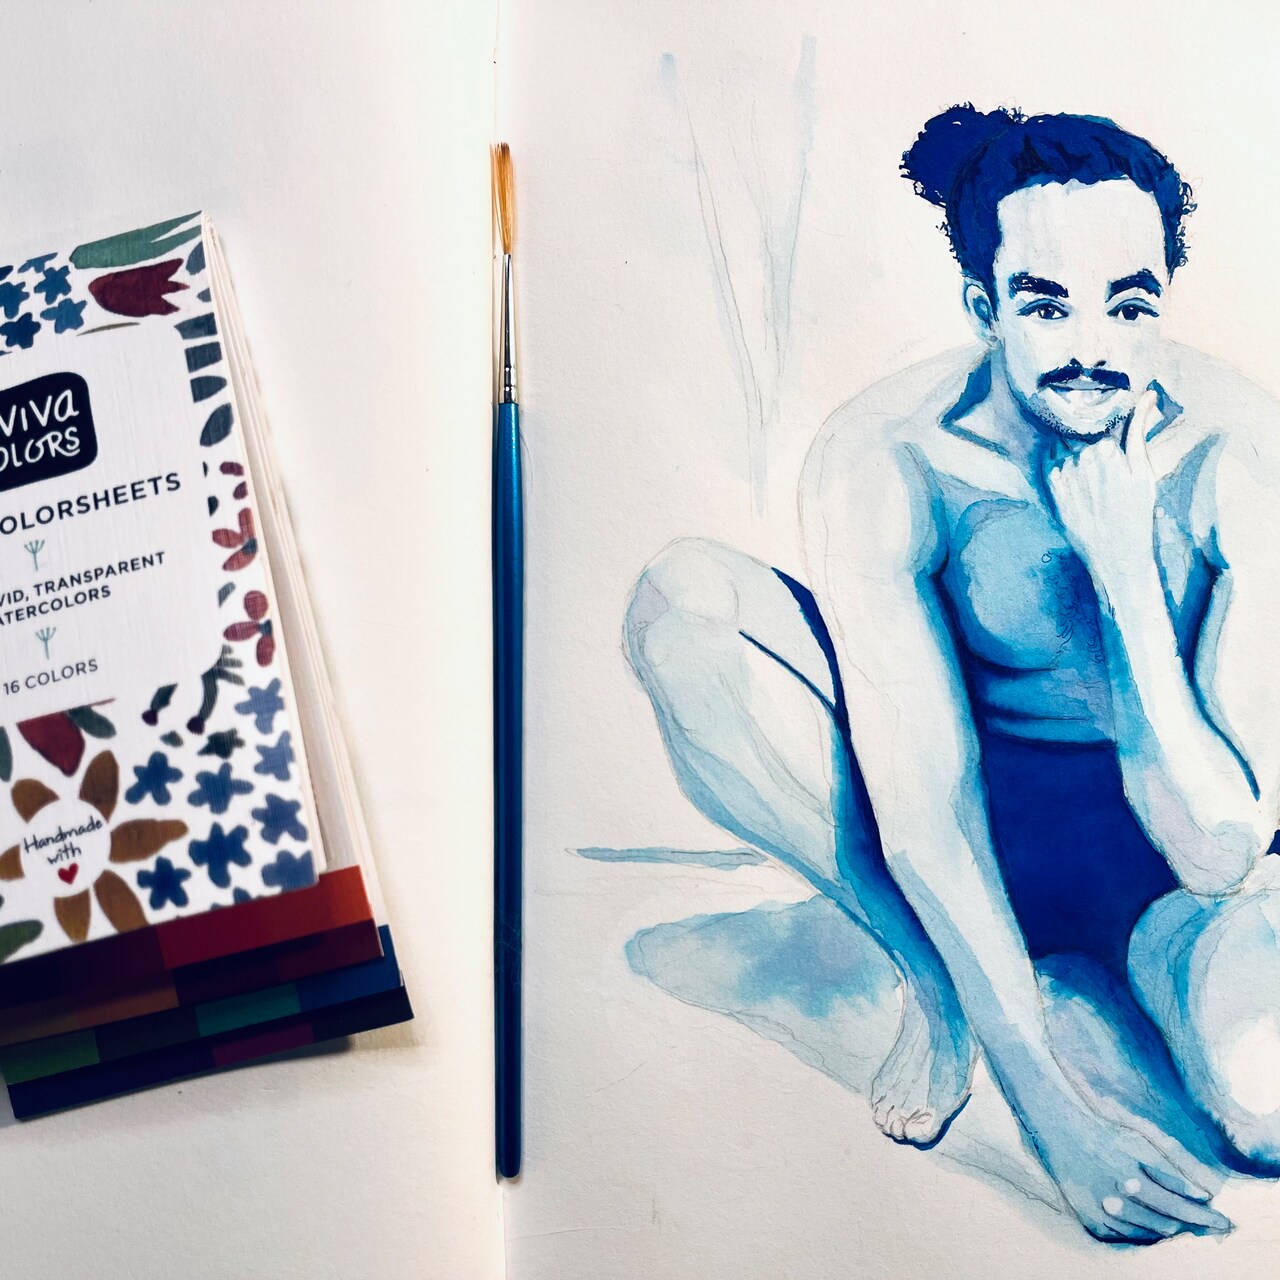 Monochromatic Watercolor Value Study of a Crouching Figure with @AdrienneHodgeArt